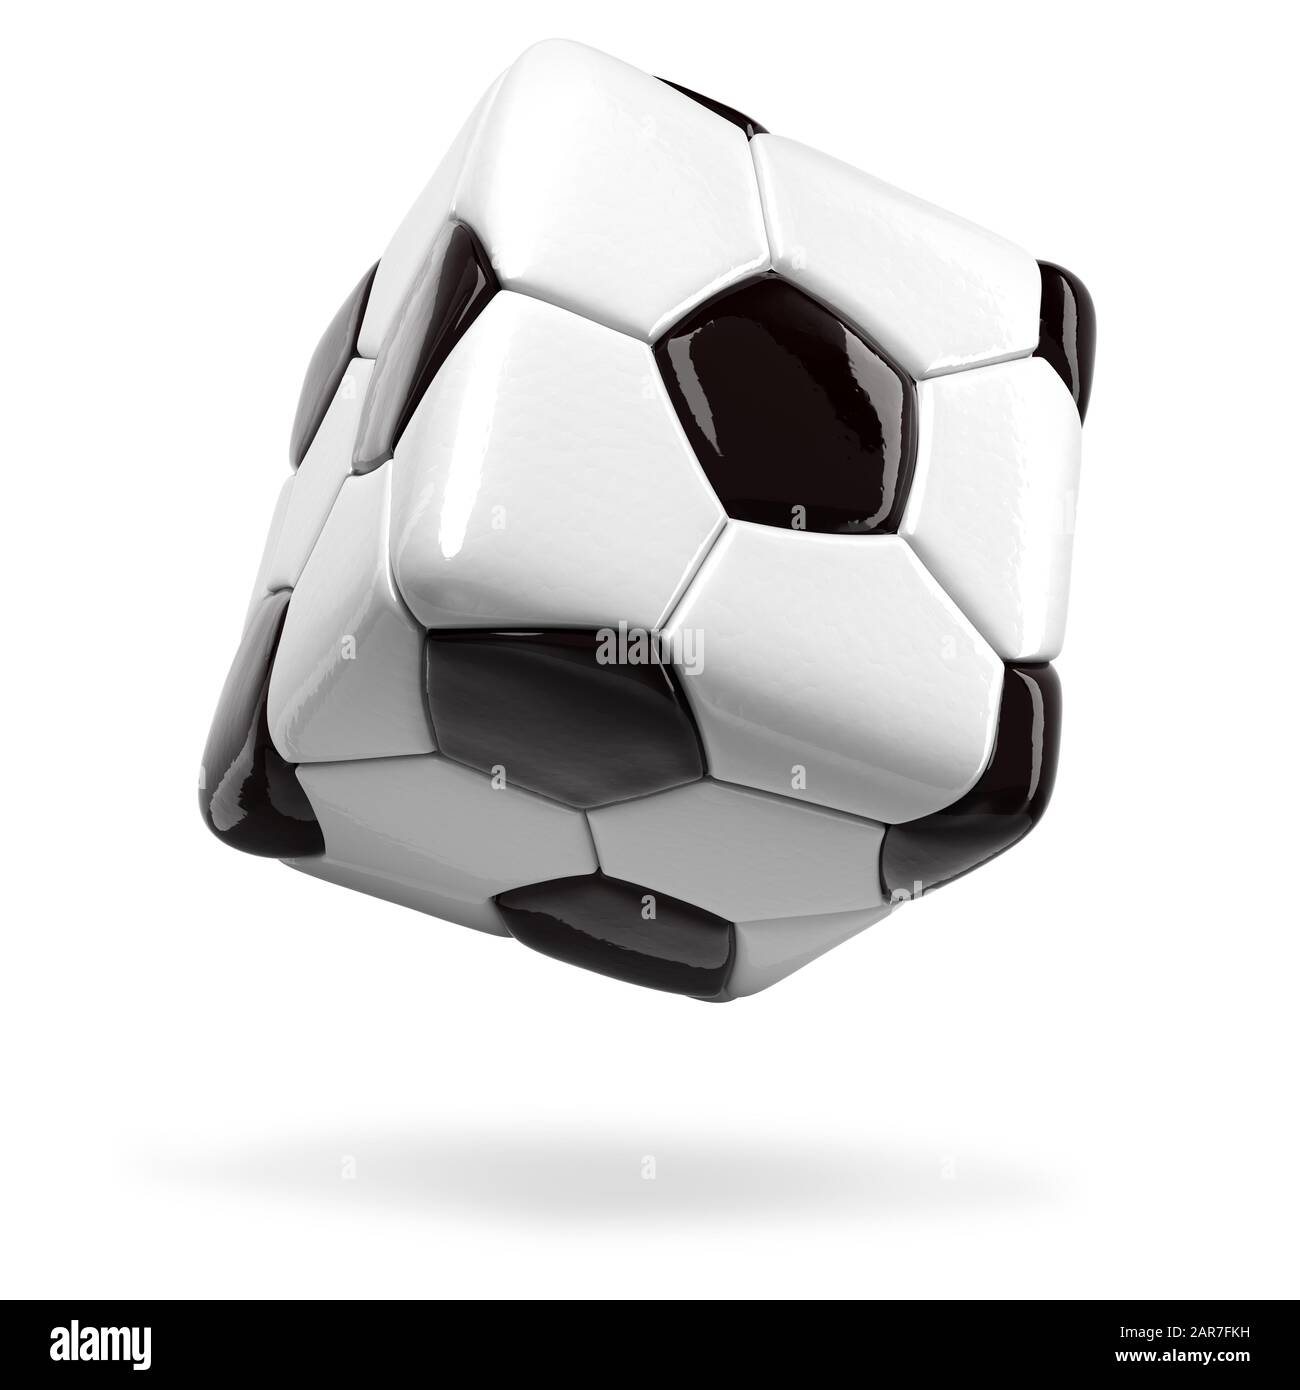 Square Football bouncing on a white background Stock Photo